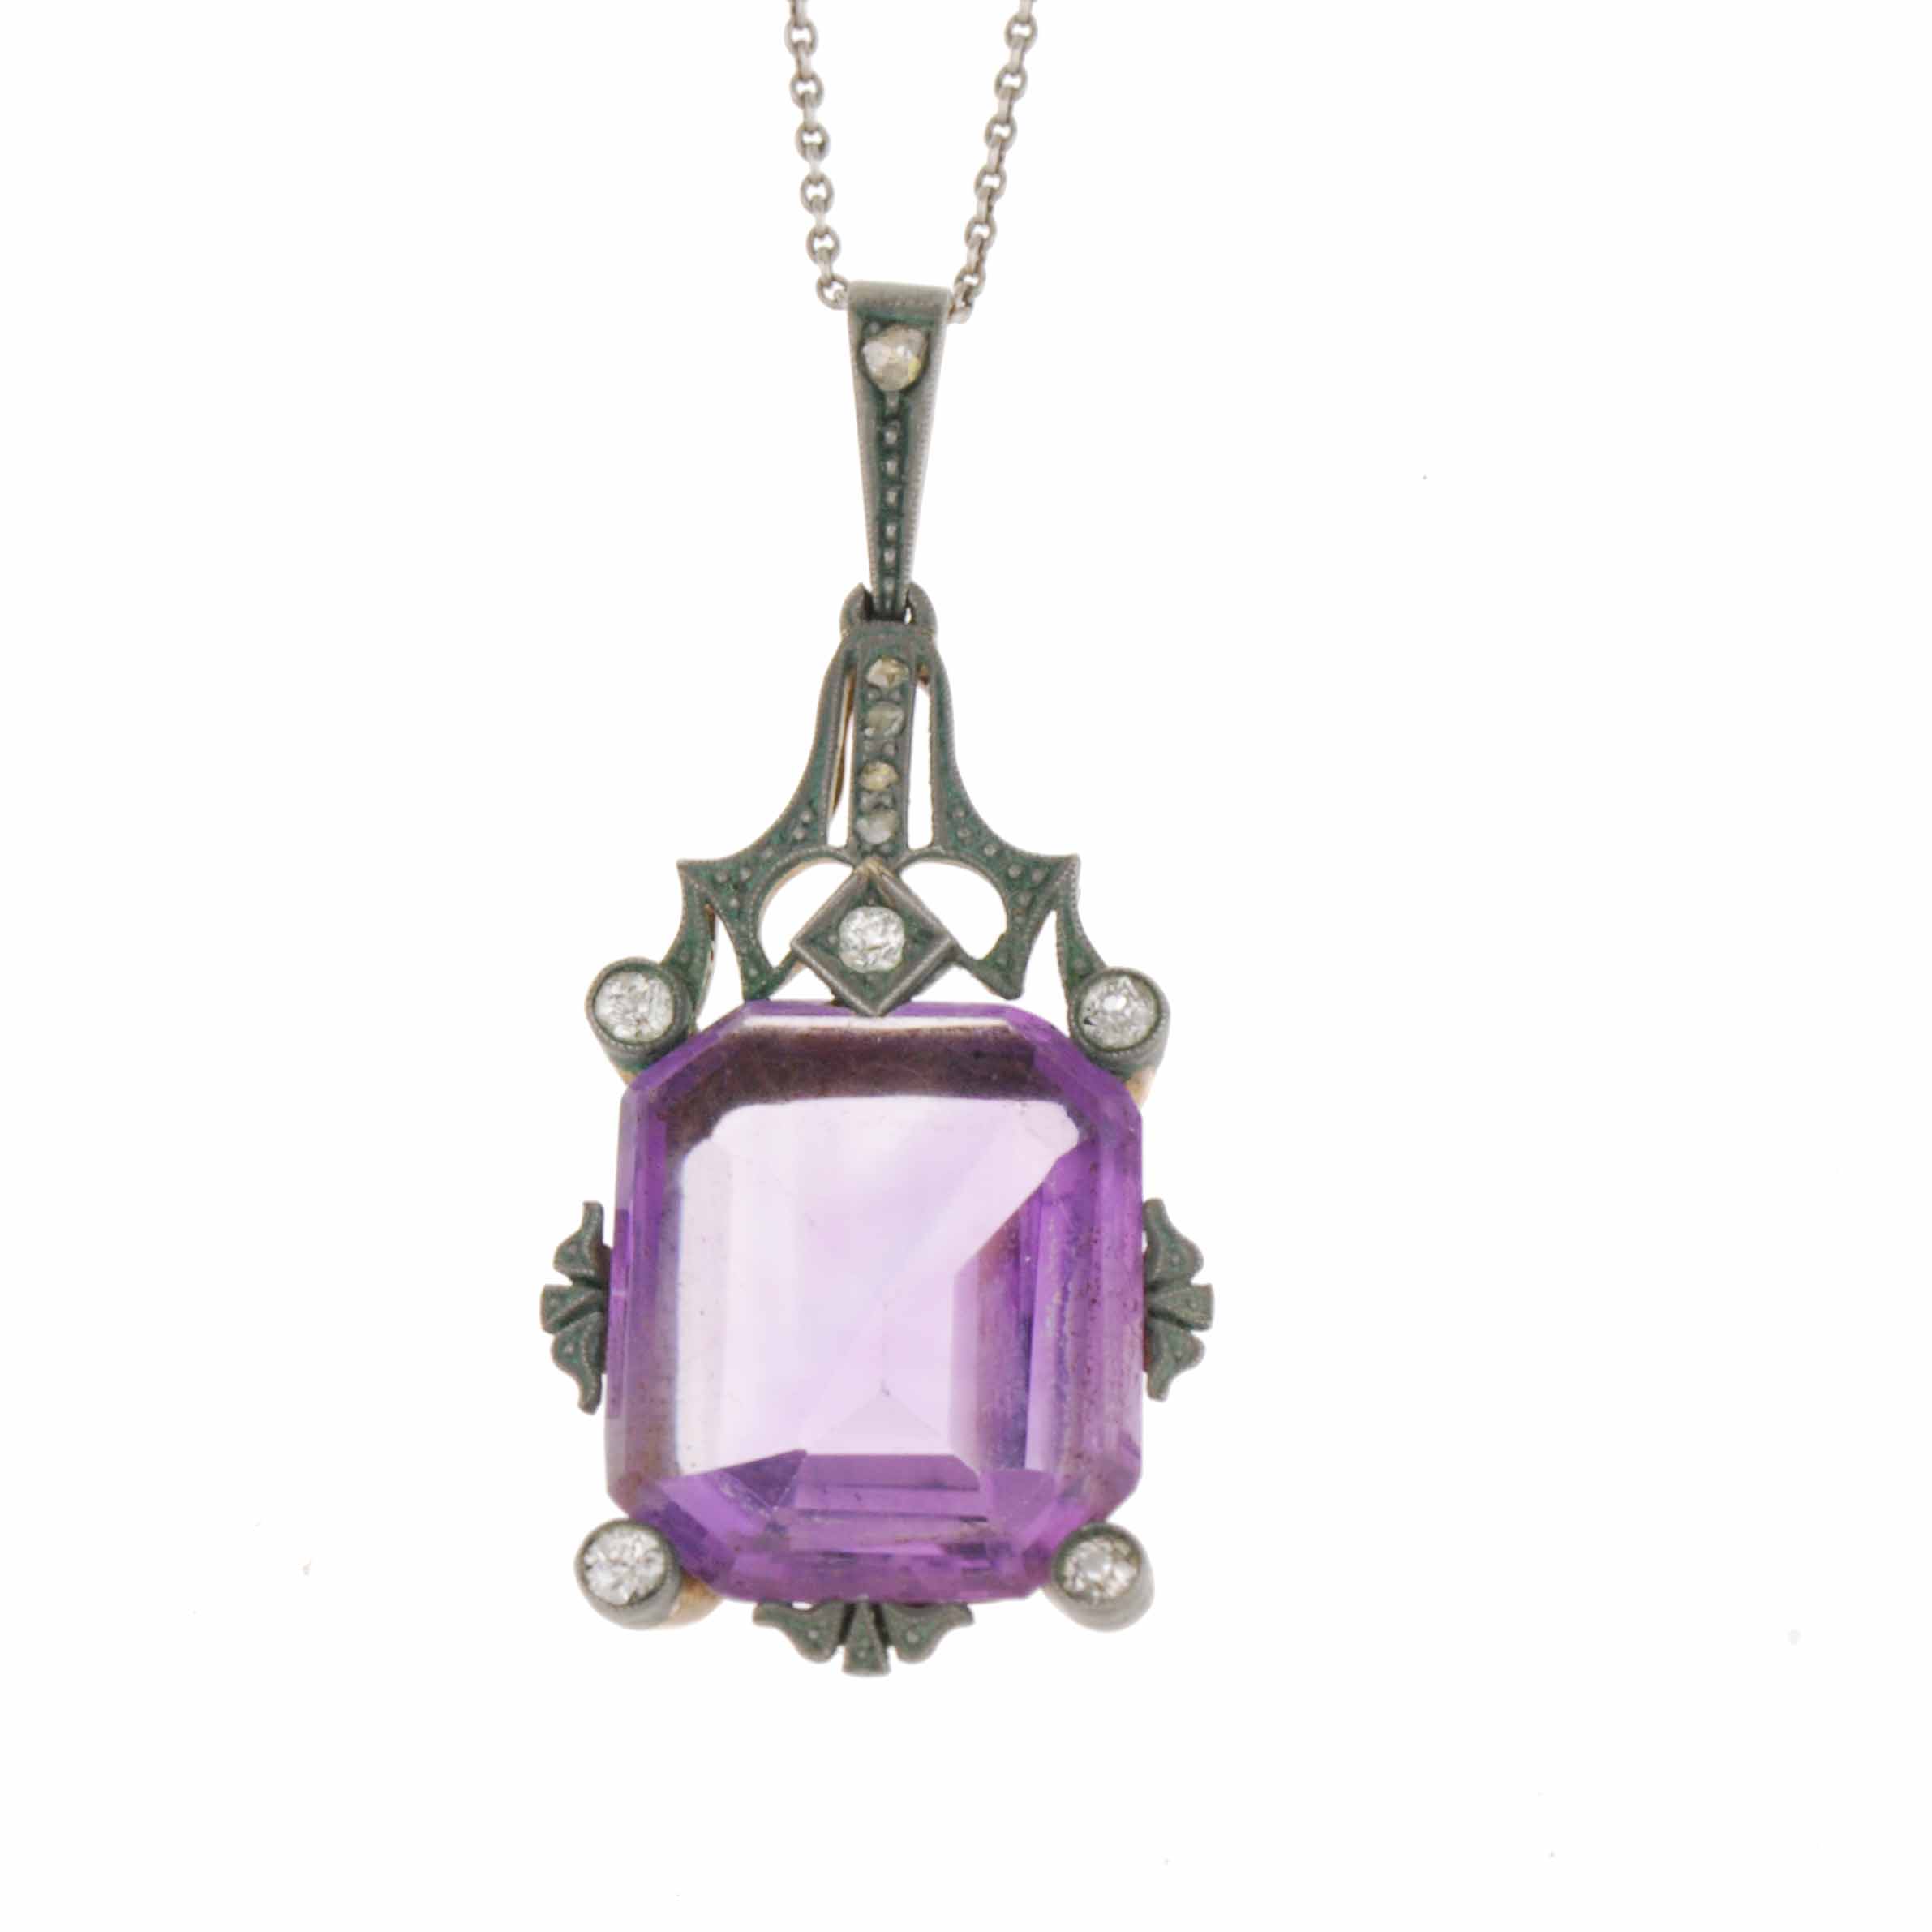 PENDANT WITH LARGE AMETHYST, EARLY C20th.